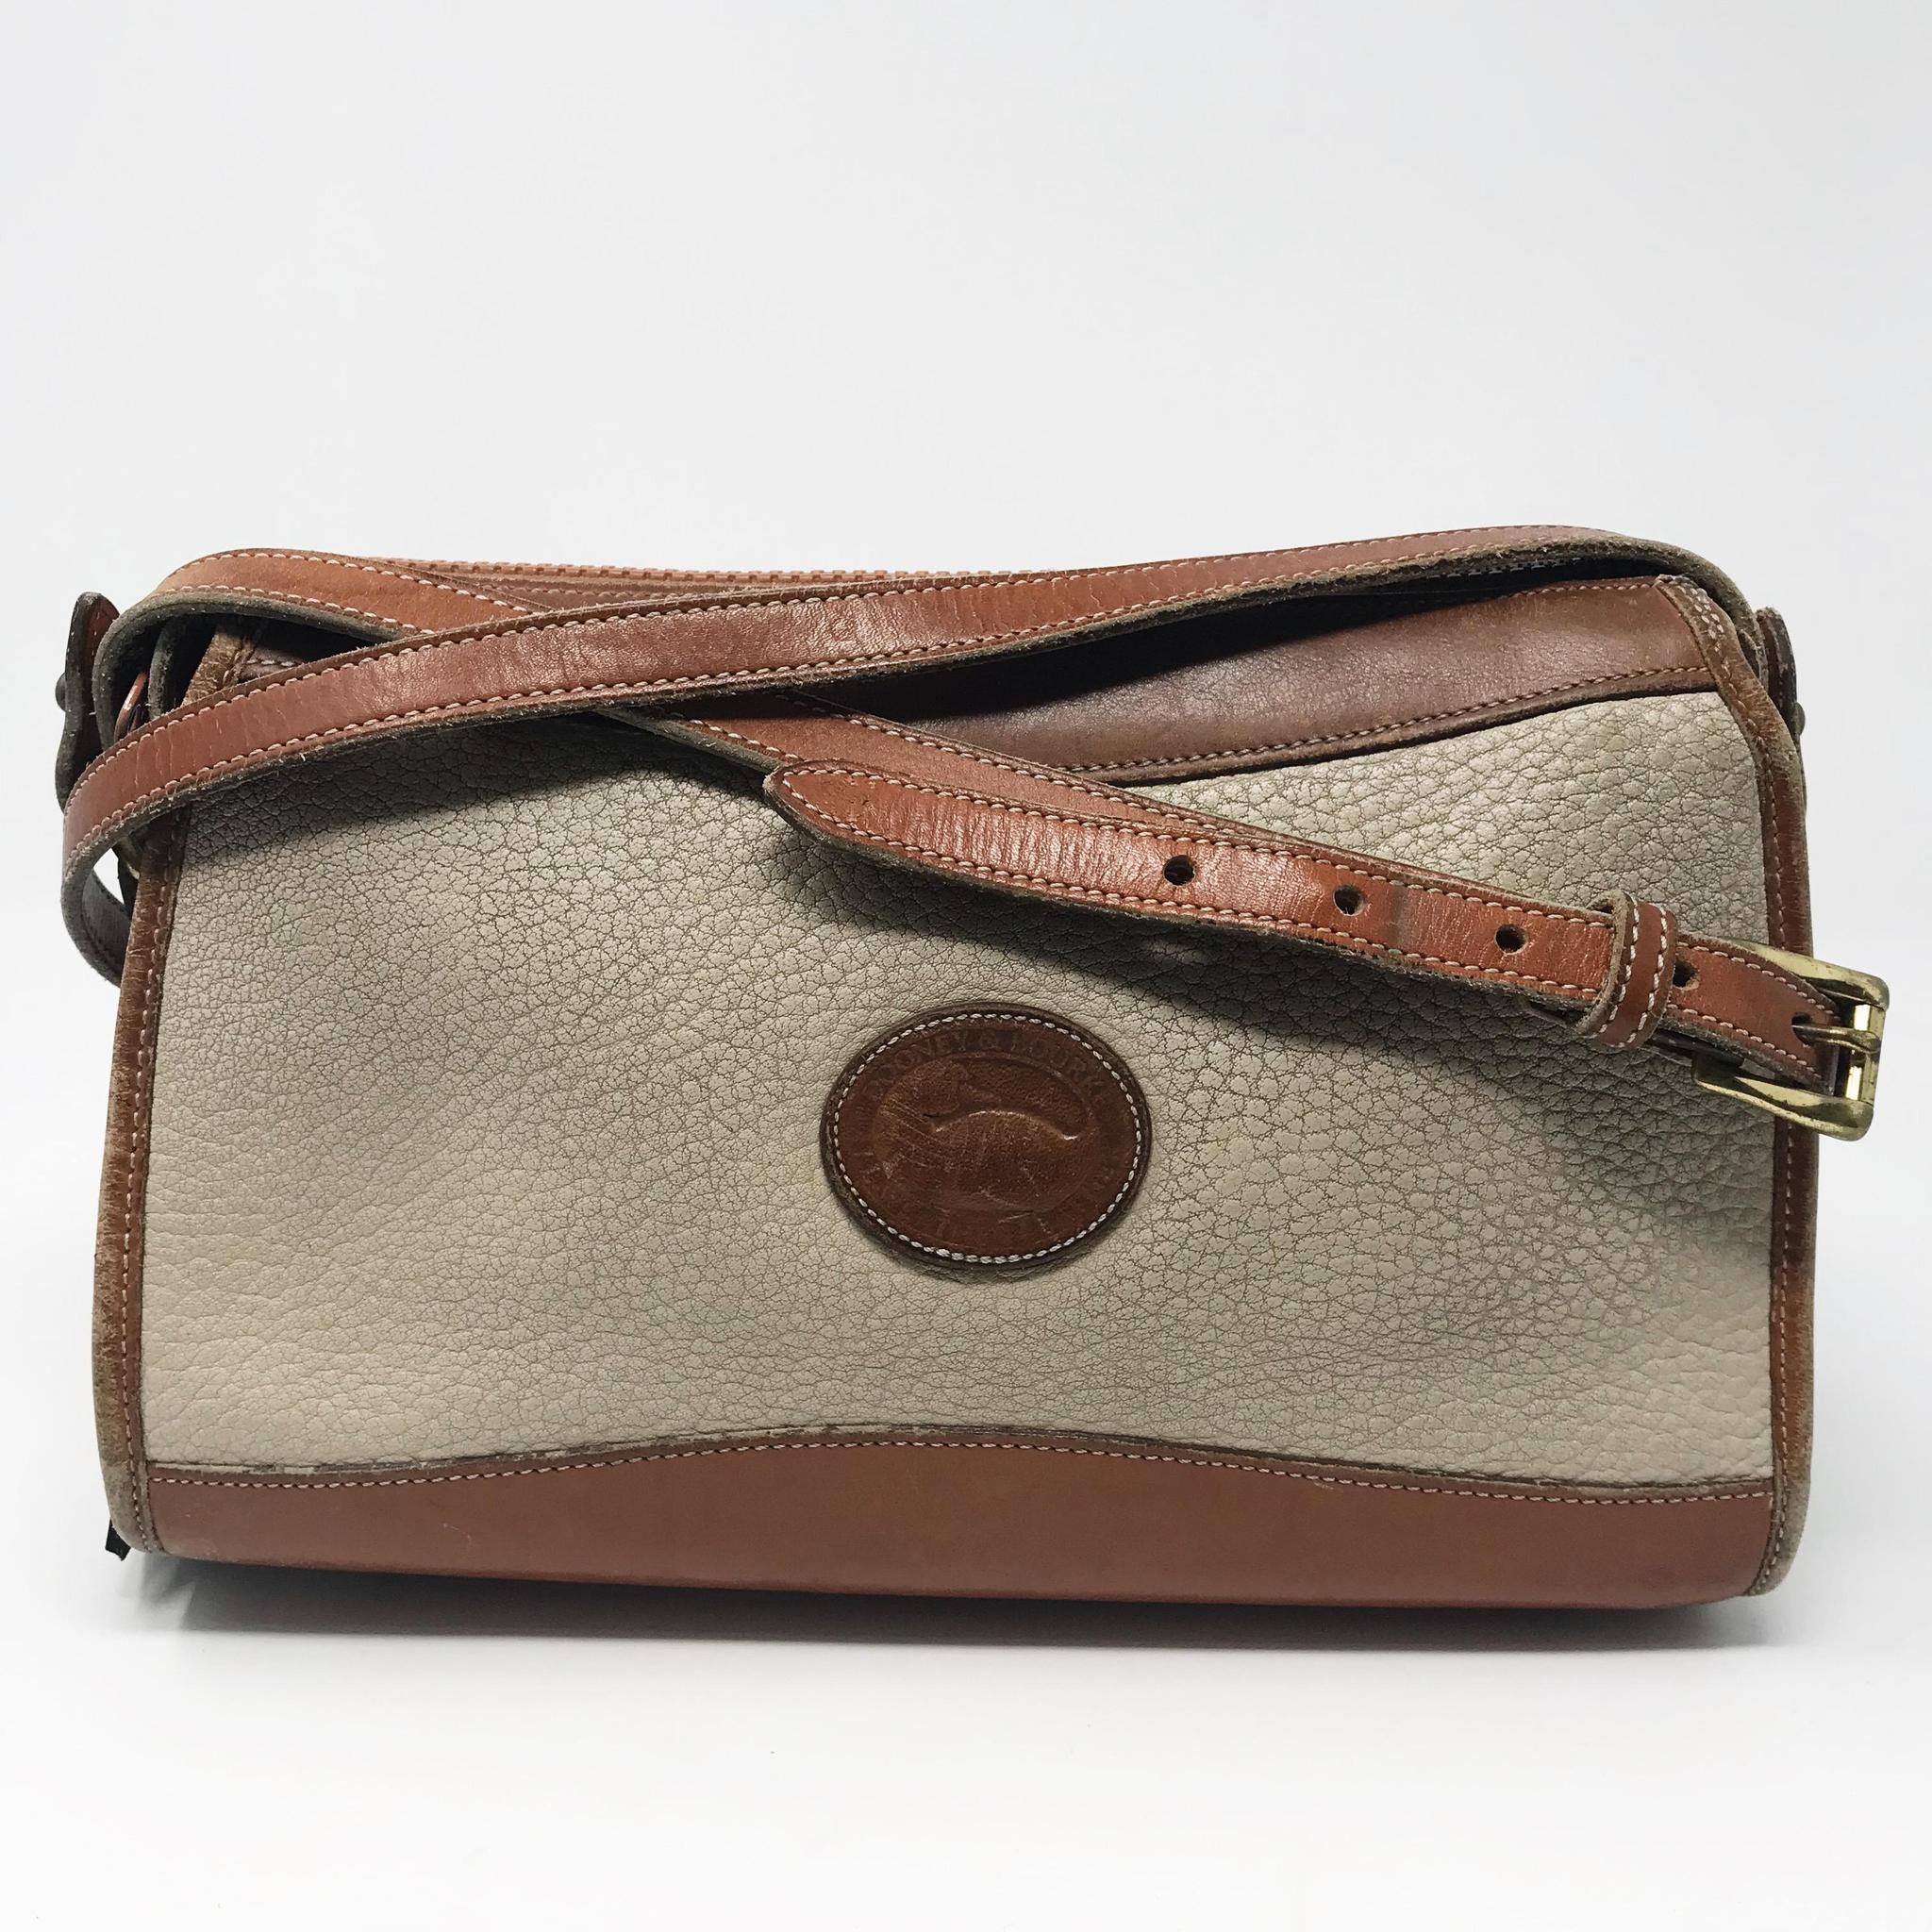 Vintage Taupe Dooney & Bourke Crossbody Bag – Canty Boots